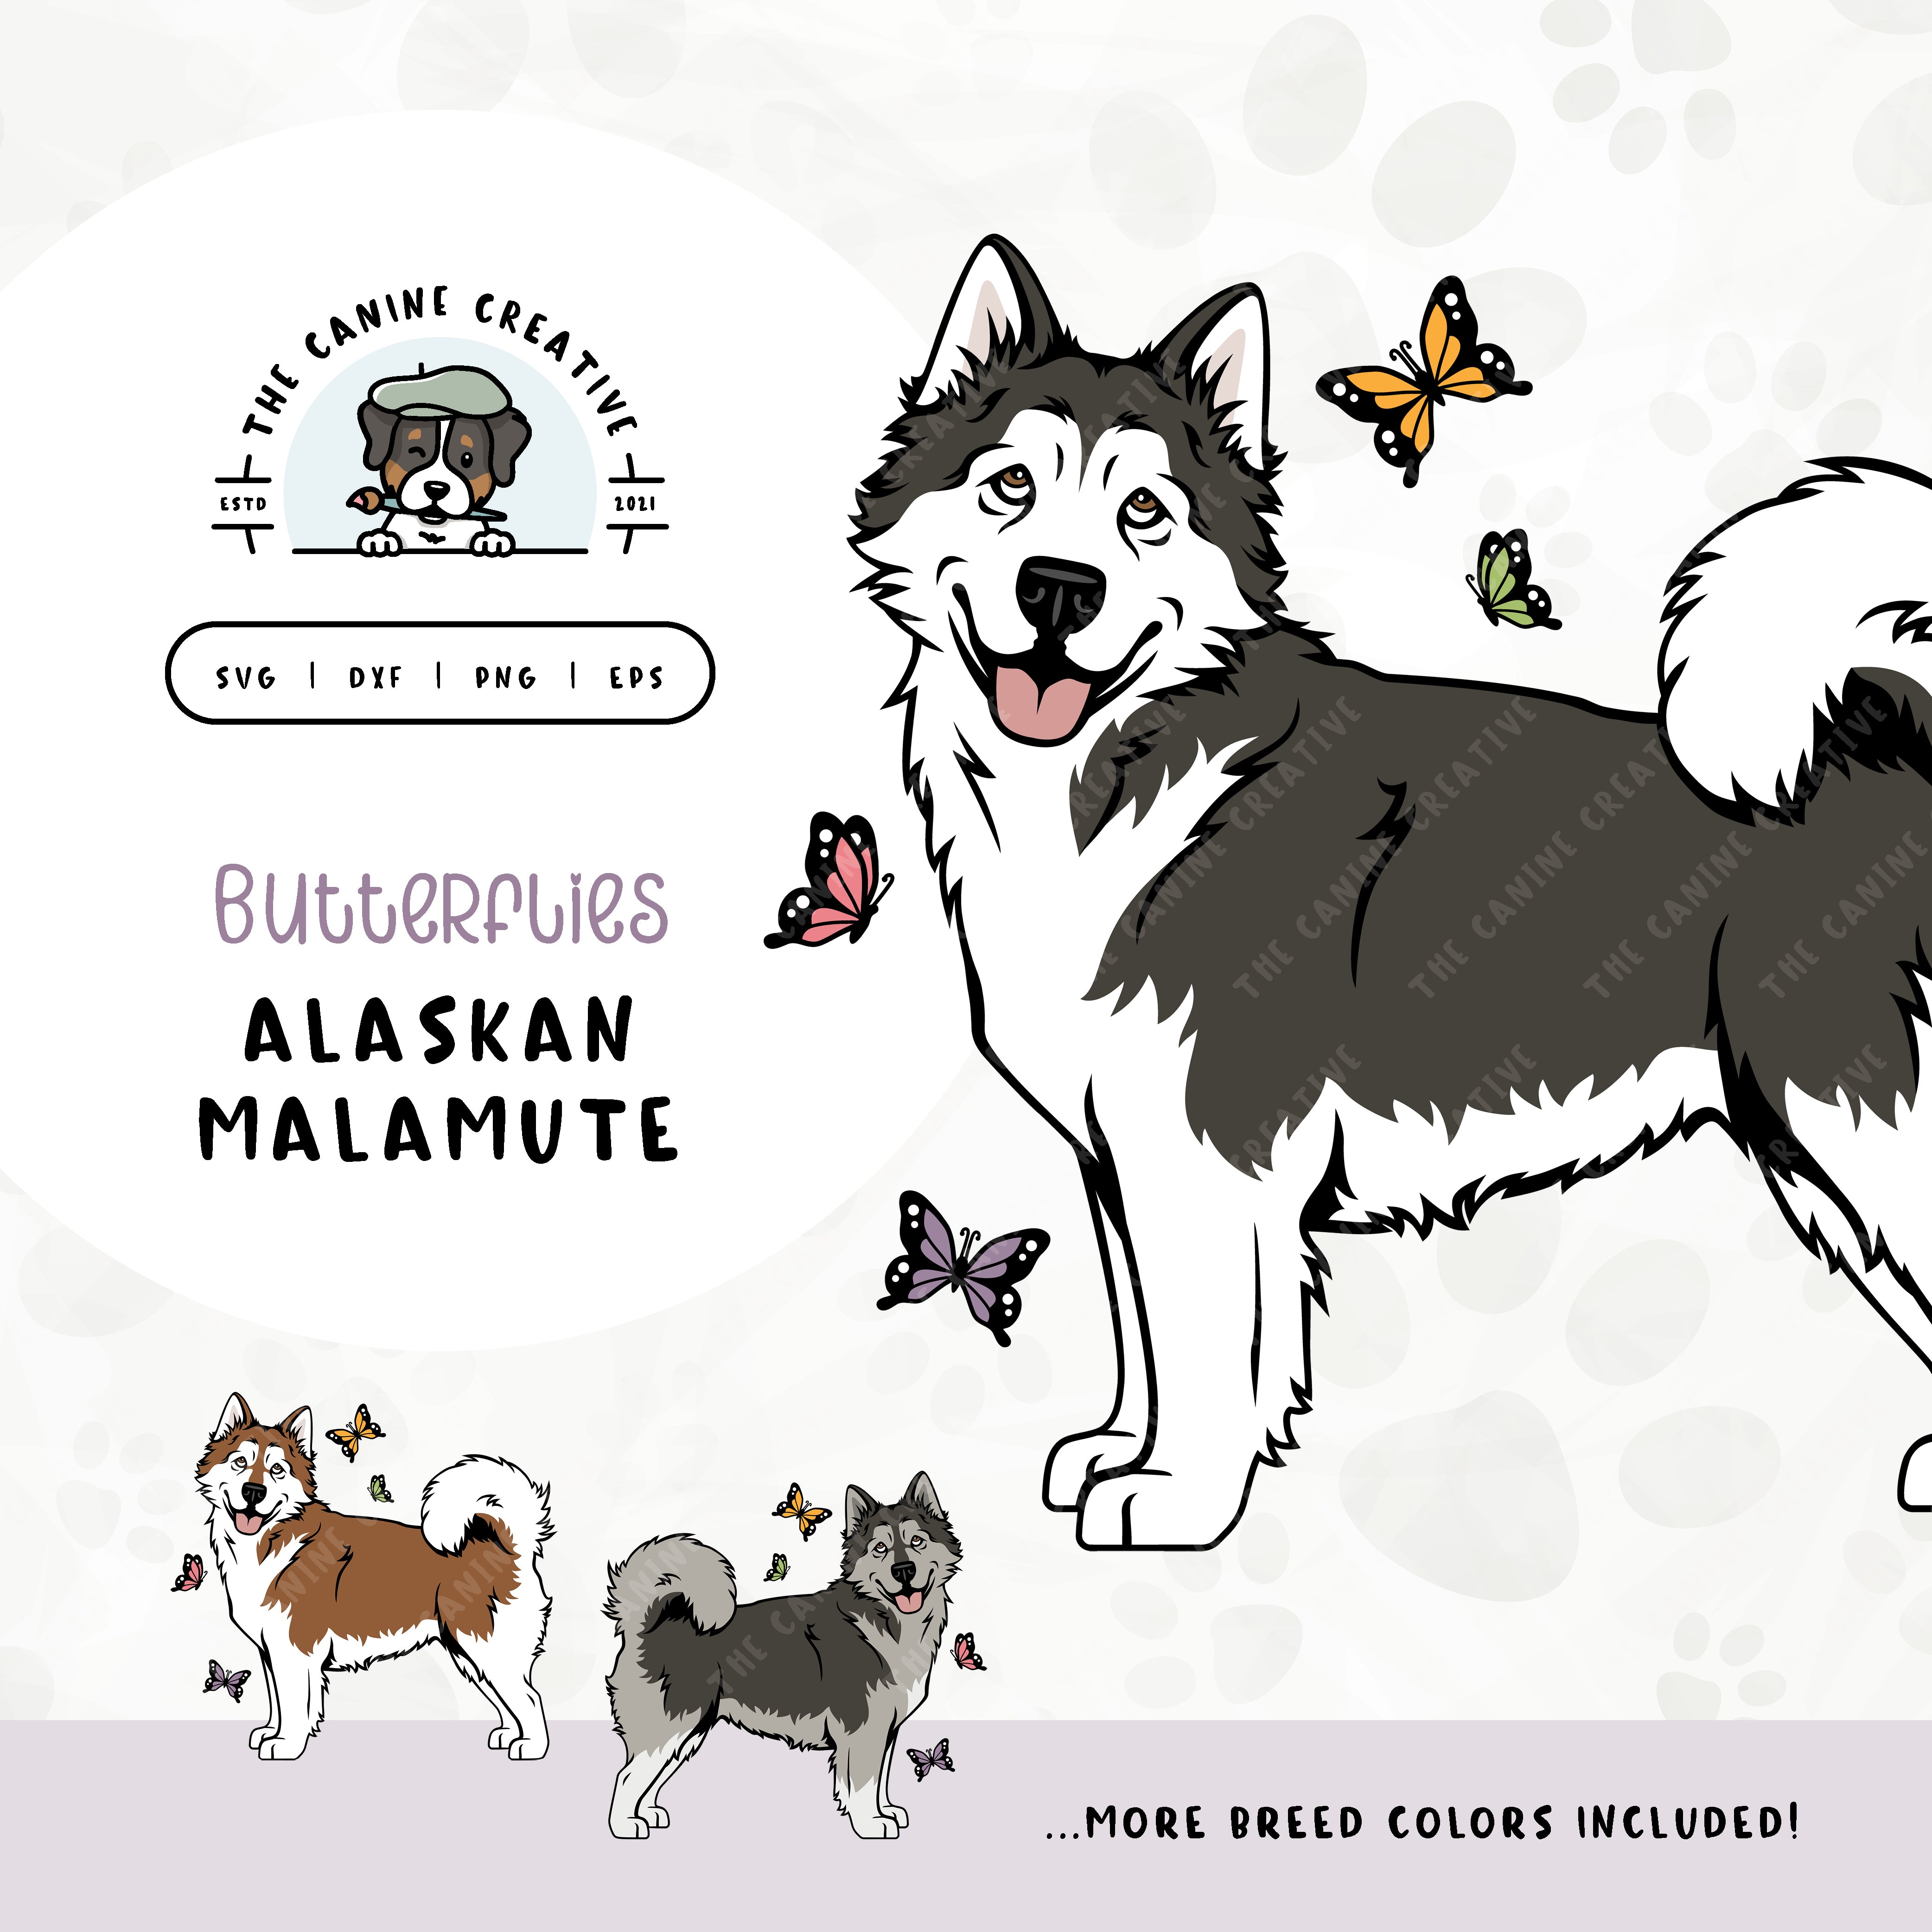 This springtime illustration features an Alaskan Malamute among colorful butterflies. File formats include: SVG, DXF, PNG, and EPS.